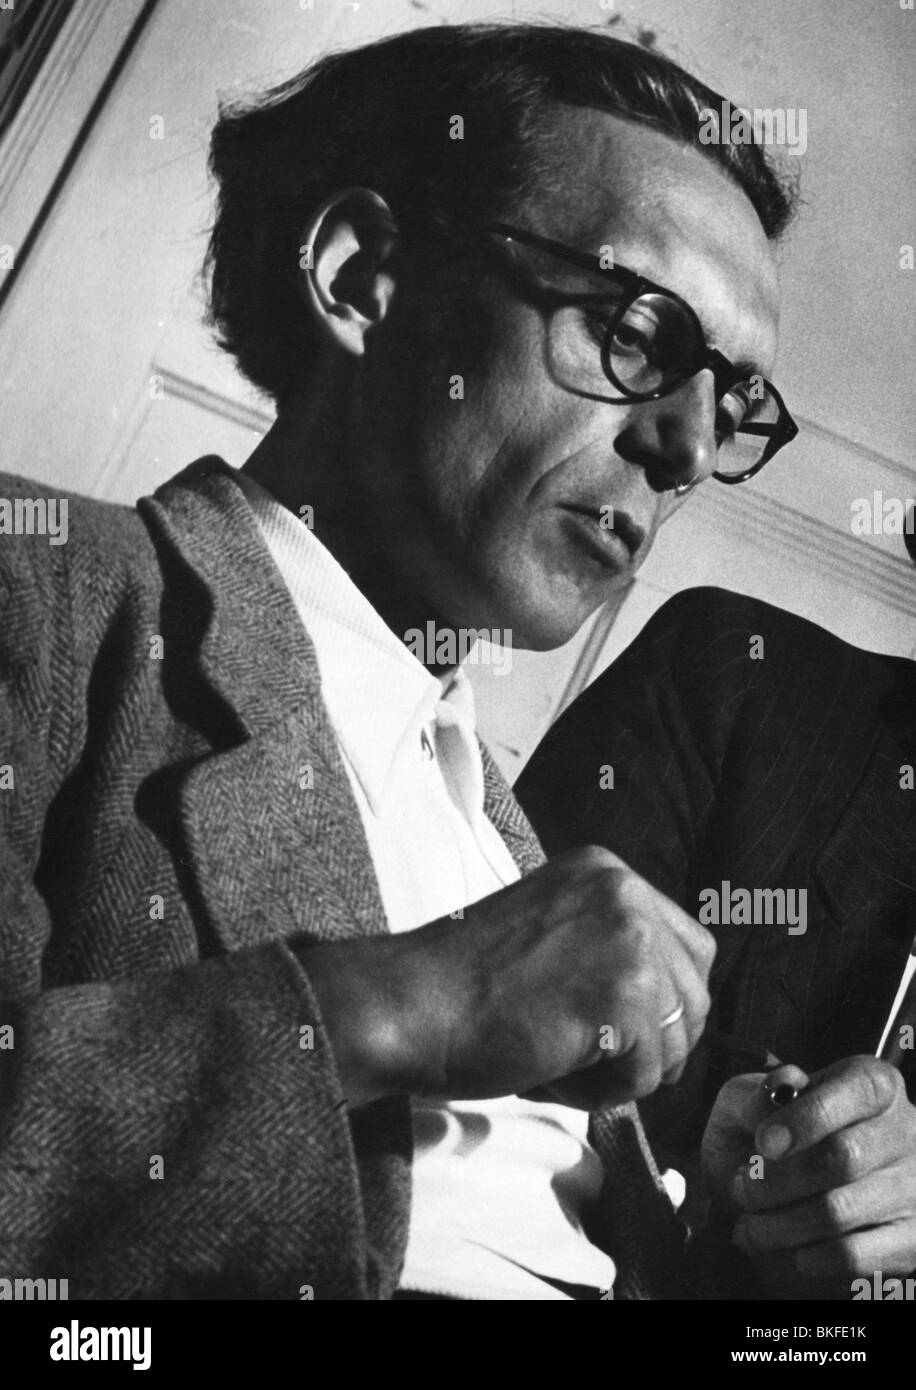 geography / travel, Germany, politics, 1950s, Bund der Kriegsdienstverweigerer (League of Conscientious Objectors), the musician E. C. Frohloff, one of the leading members, 1951, Stock Photo